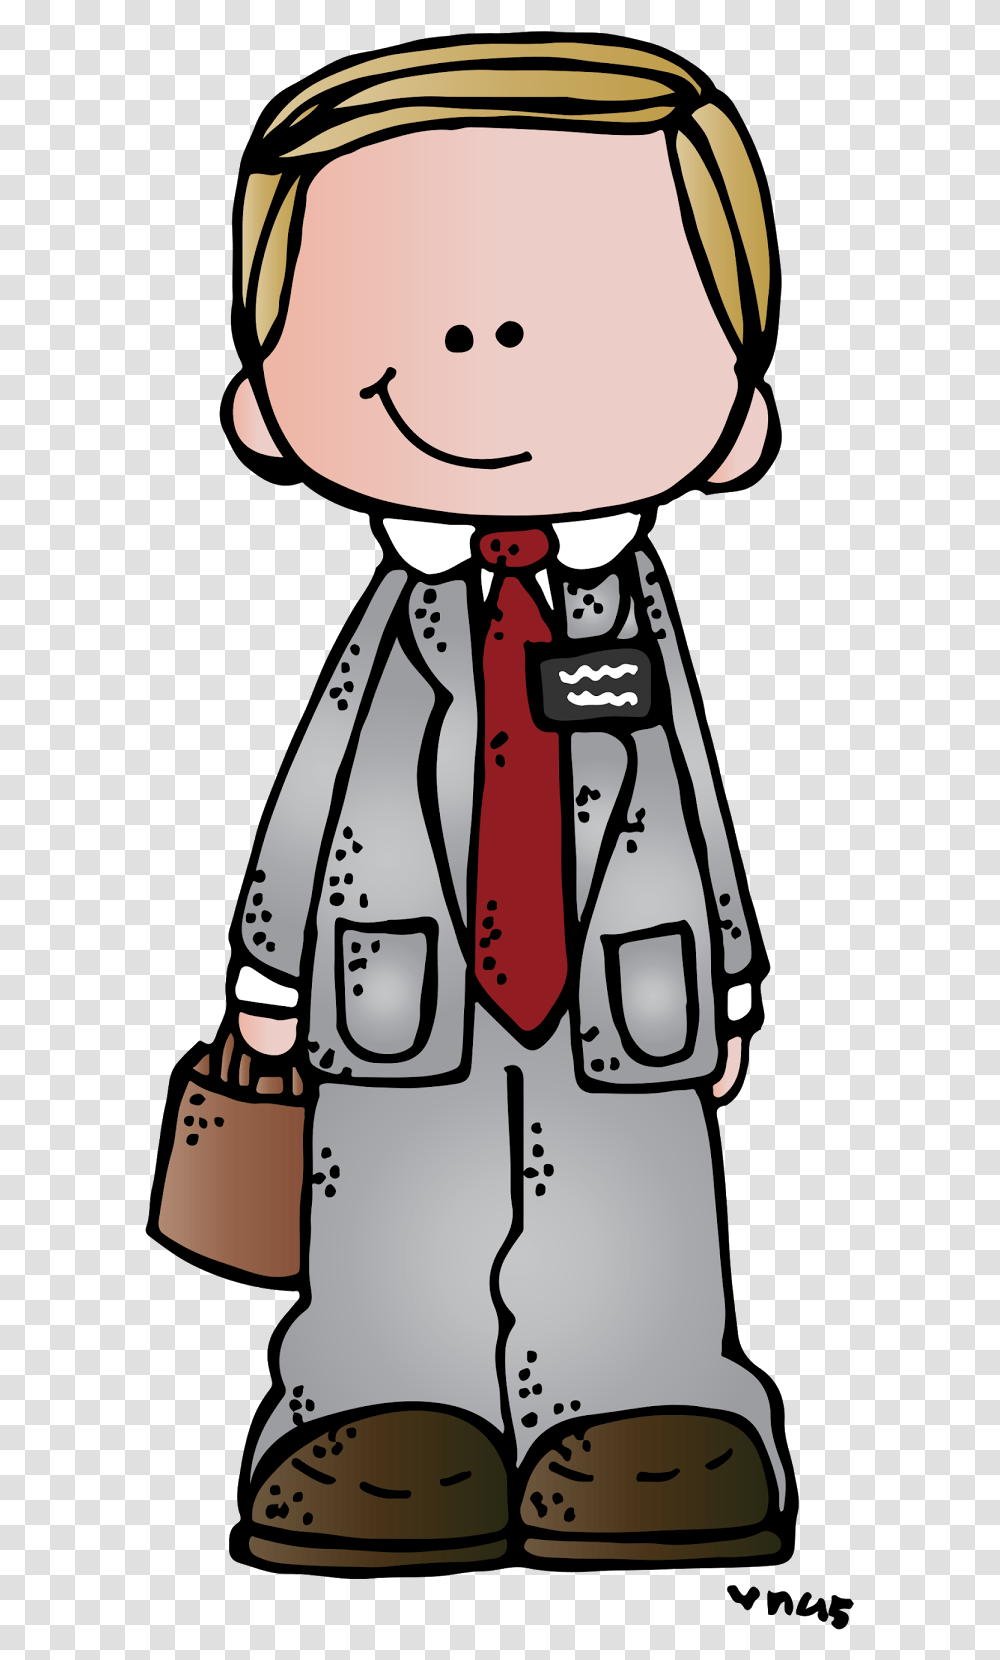 Lds Missionary Cartoon Lds Missionary Cartoon, Tie, Accessories, Accessory, Performer Transparent Png